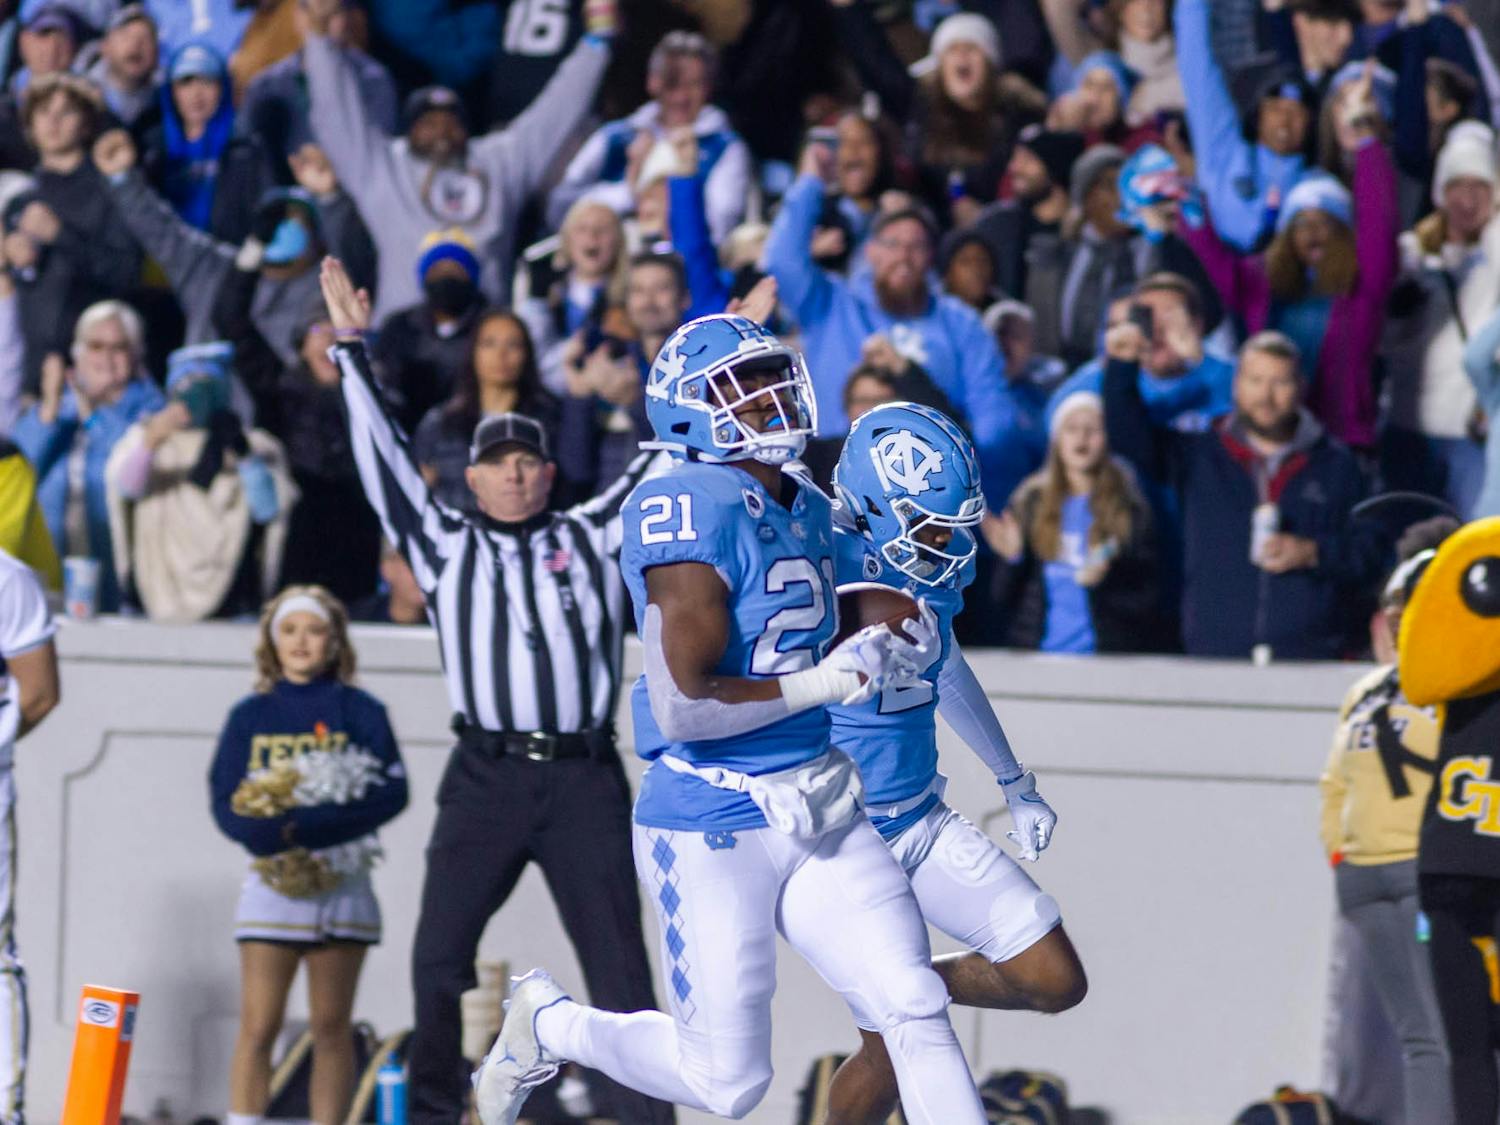 UNC sophomore running back, Elijah Green (21), runs toward the end zone to score the first touchdown of the evening during the football game against Georgia Tech at Kenan Stadium on Saturday, Nov. 19, 2022.